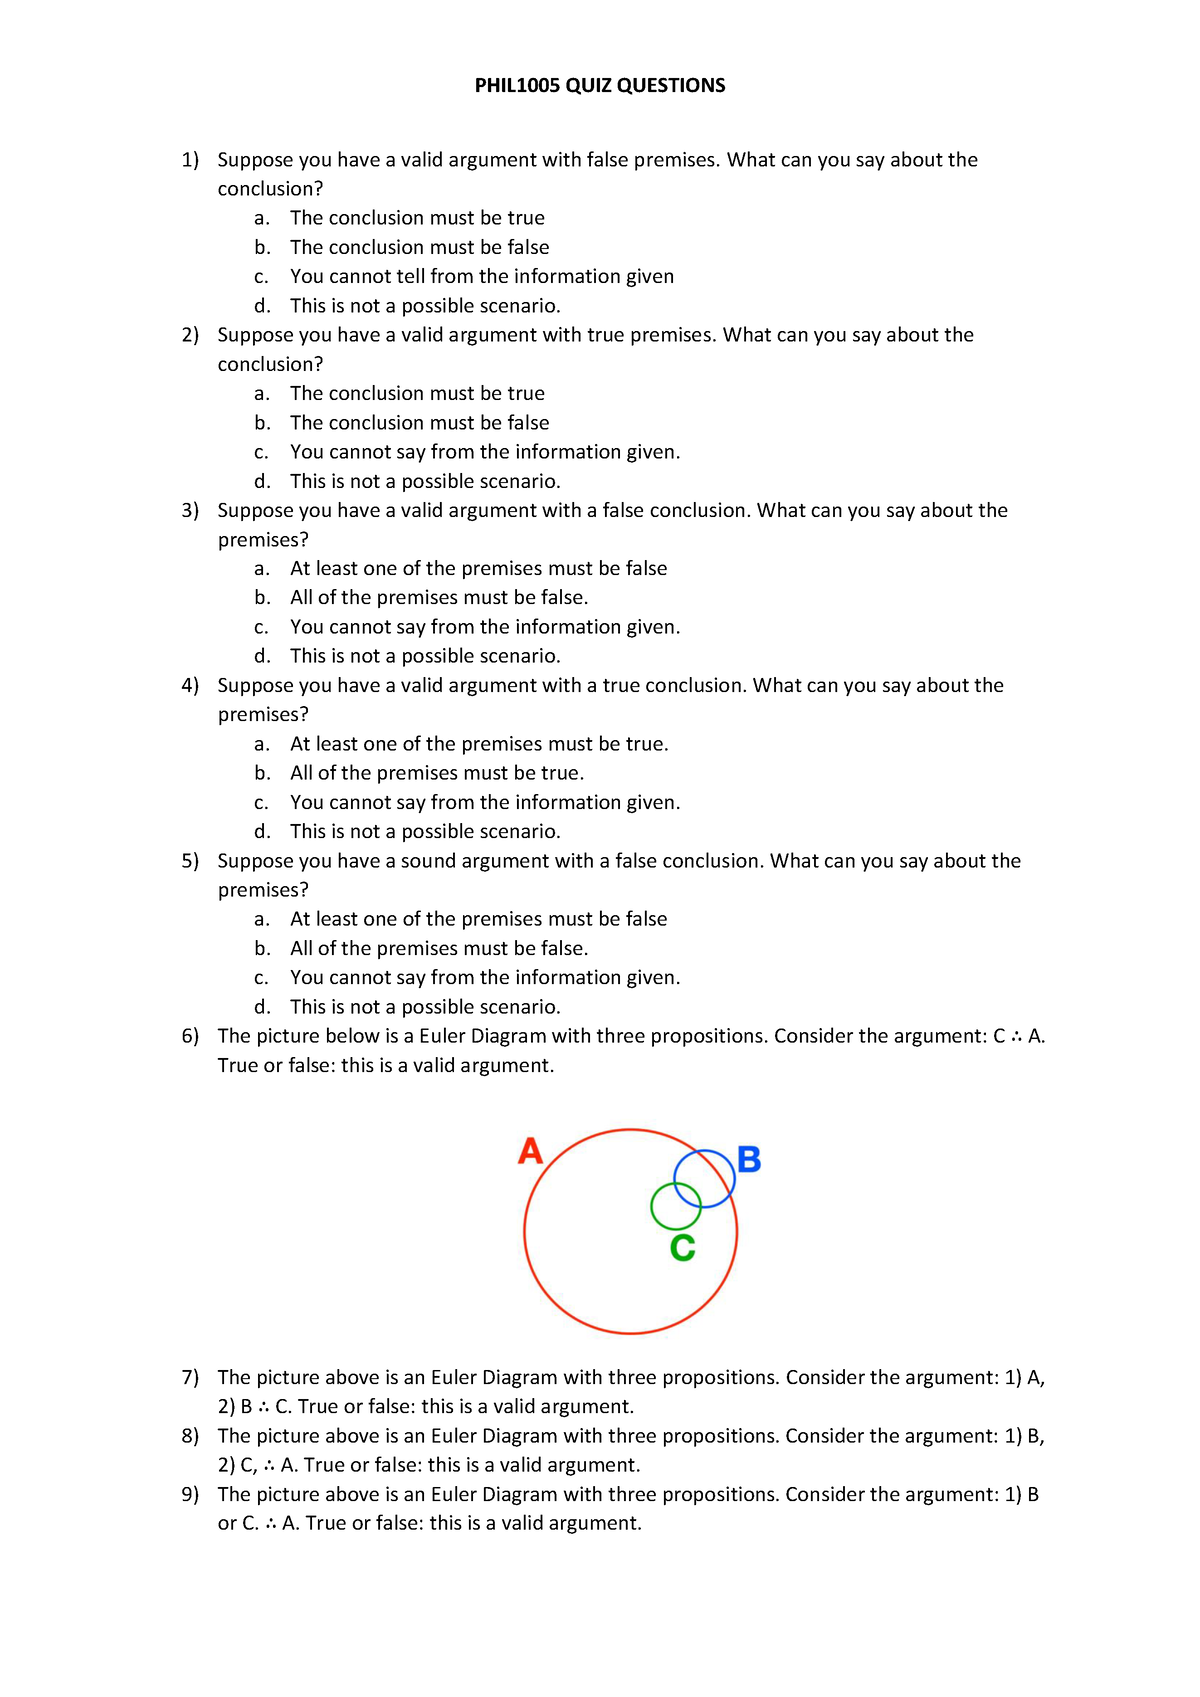 phil1005-quiz-questions-phil1005-quiz-questions-1-suppose-you-have-a